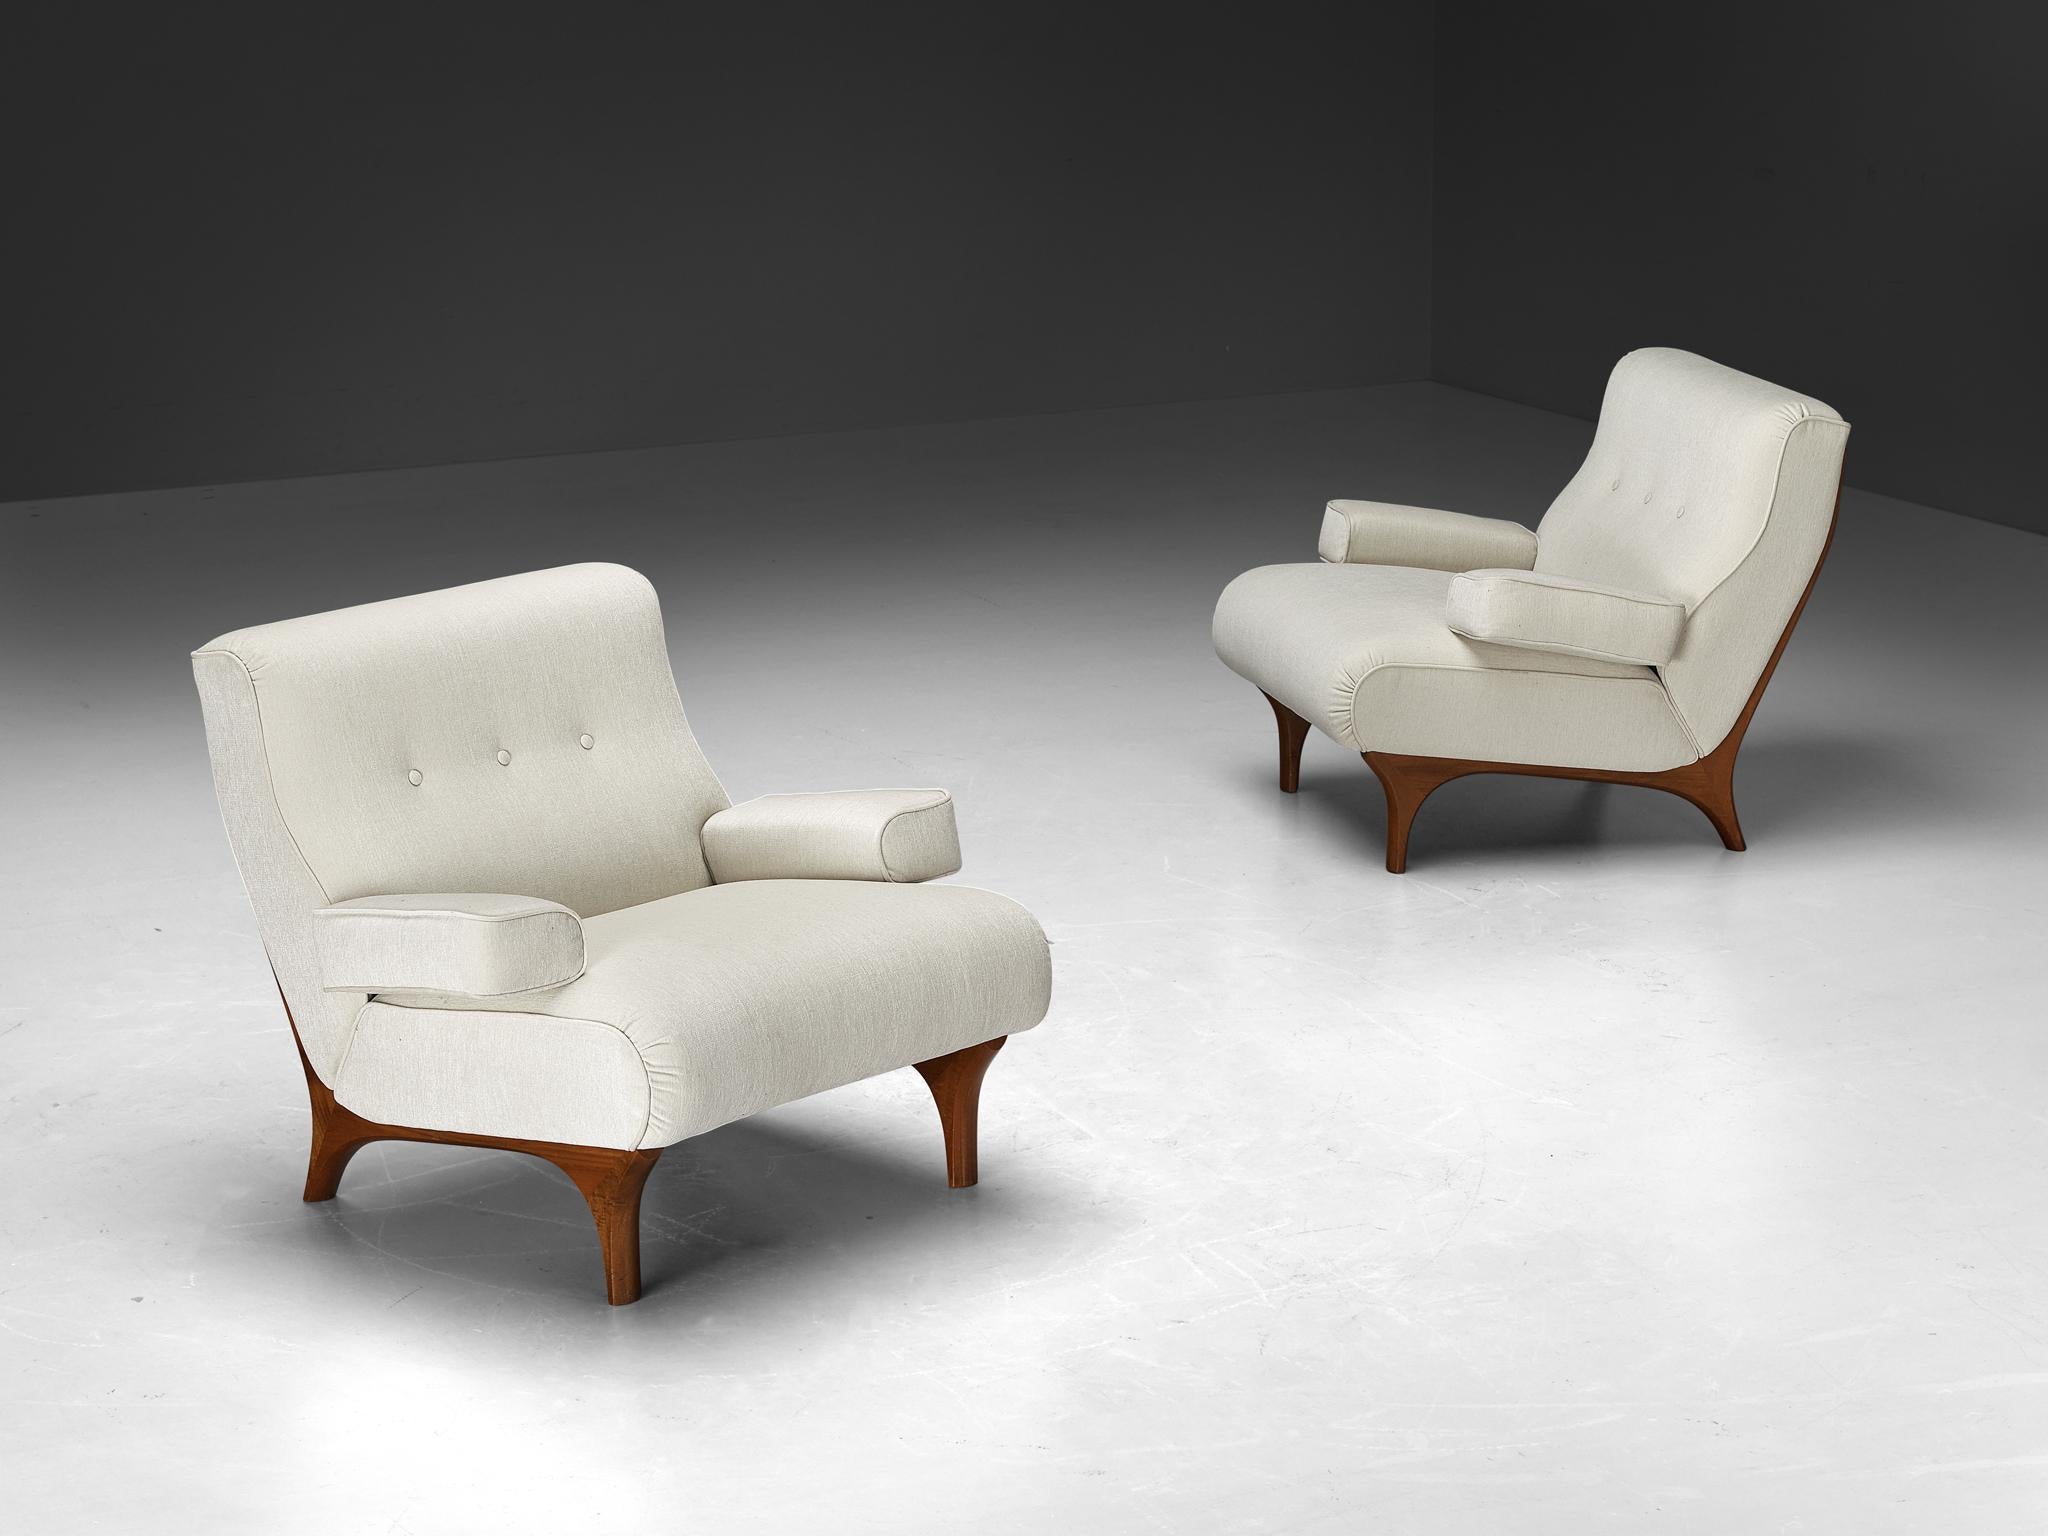 Eugenio Gerli for Tecno, pair of 'Sir' easy chairs, model 'P73', walnut, reupholstered in 'Marabou' chenille by Dedar Milano, Italy, design/production 1966

Eugenio Gerli's design, model P73, exemplifies the quintessential Italian Mid-Century Modern